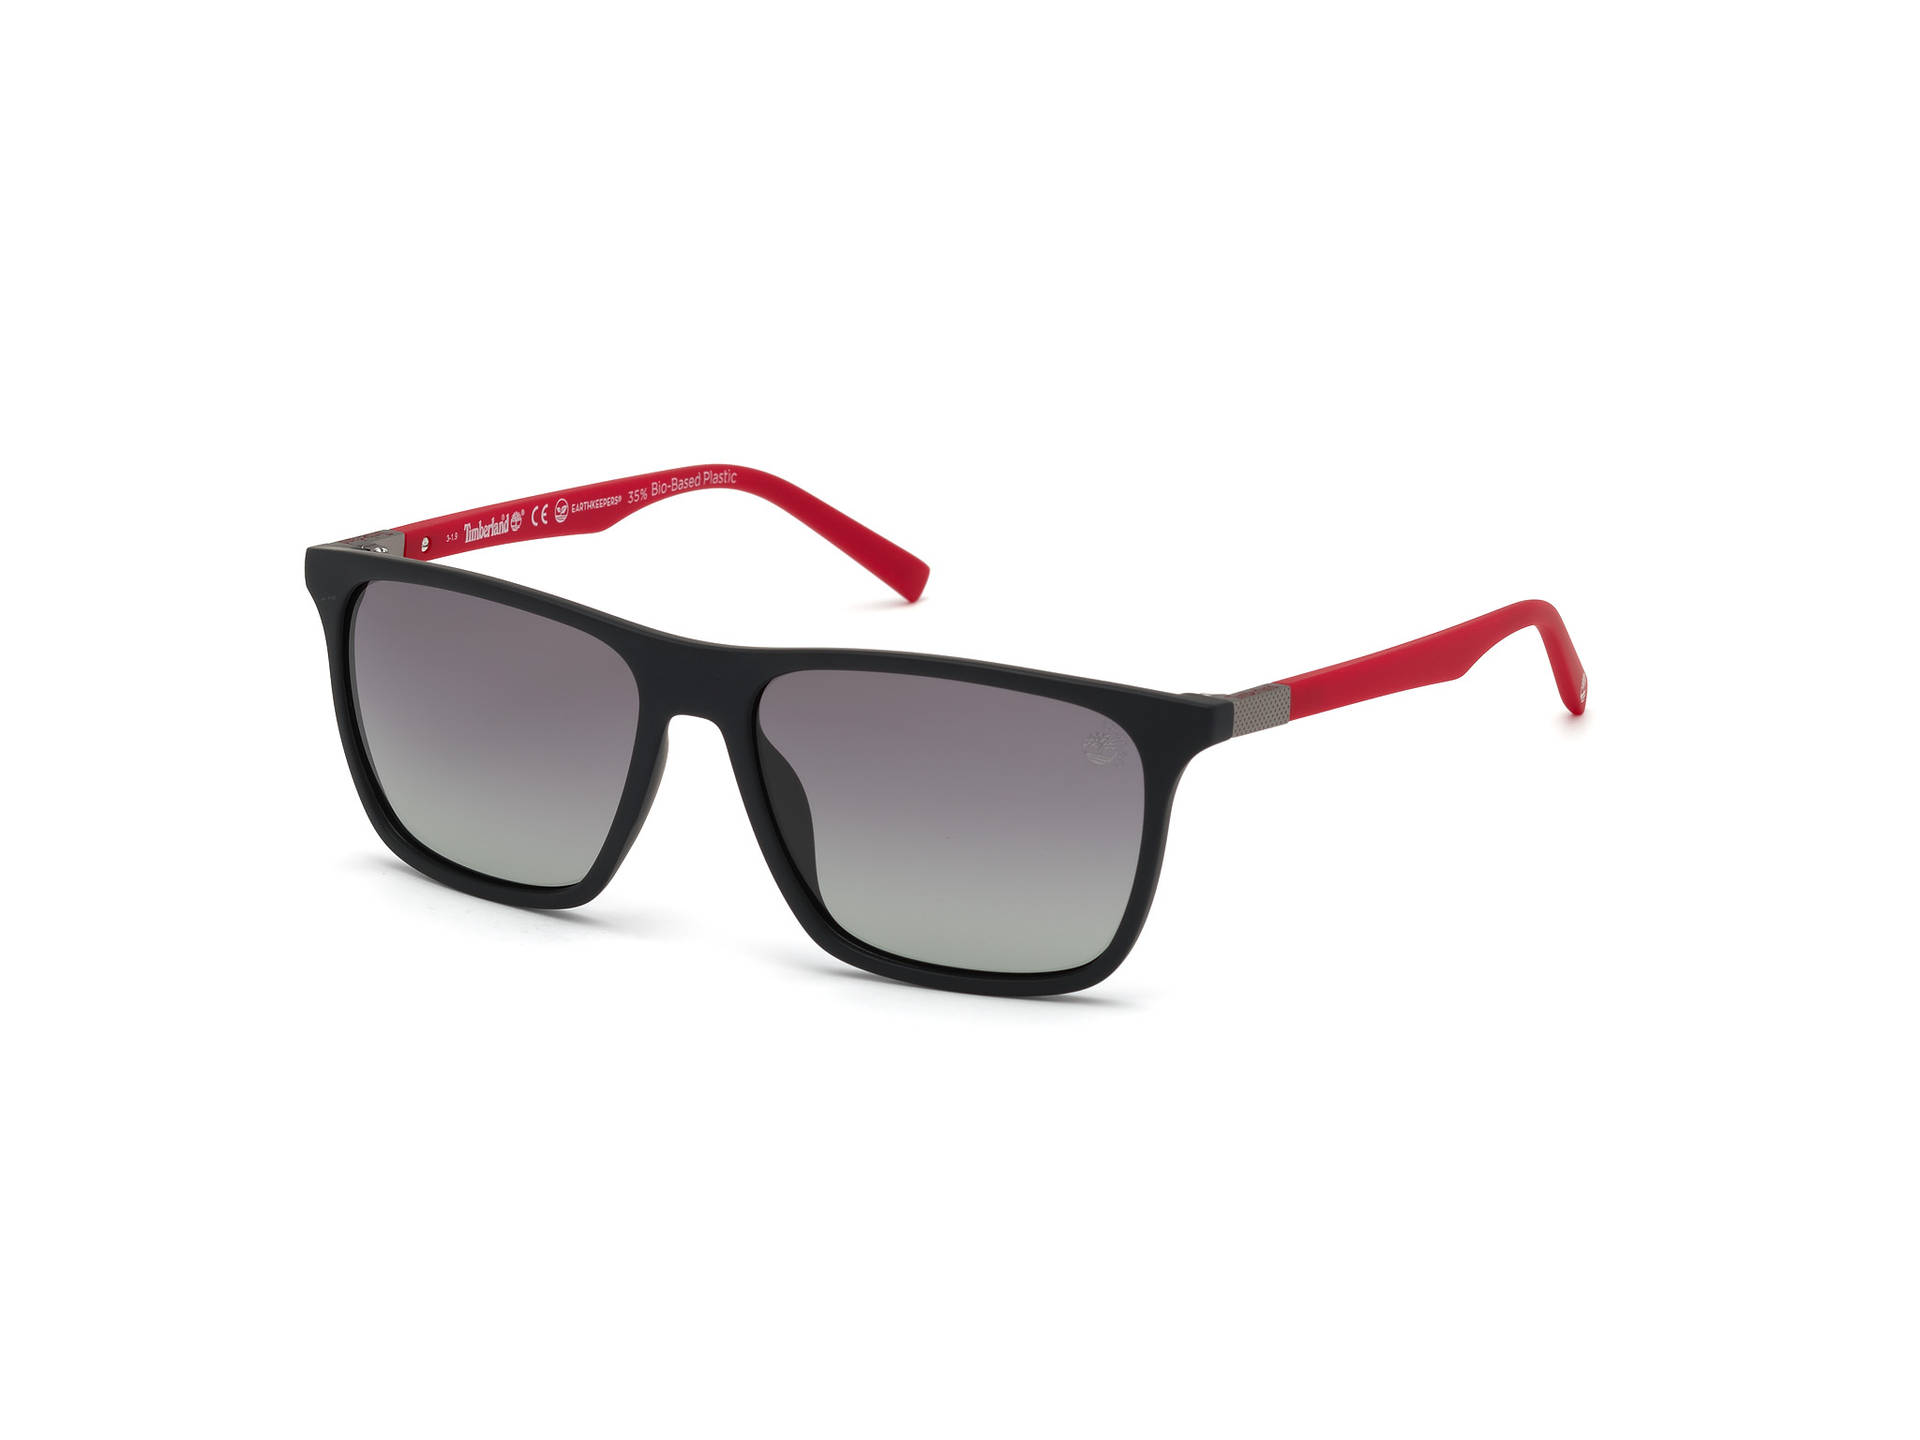 Timberland Sunglasses Black And Red Wallpaper